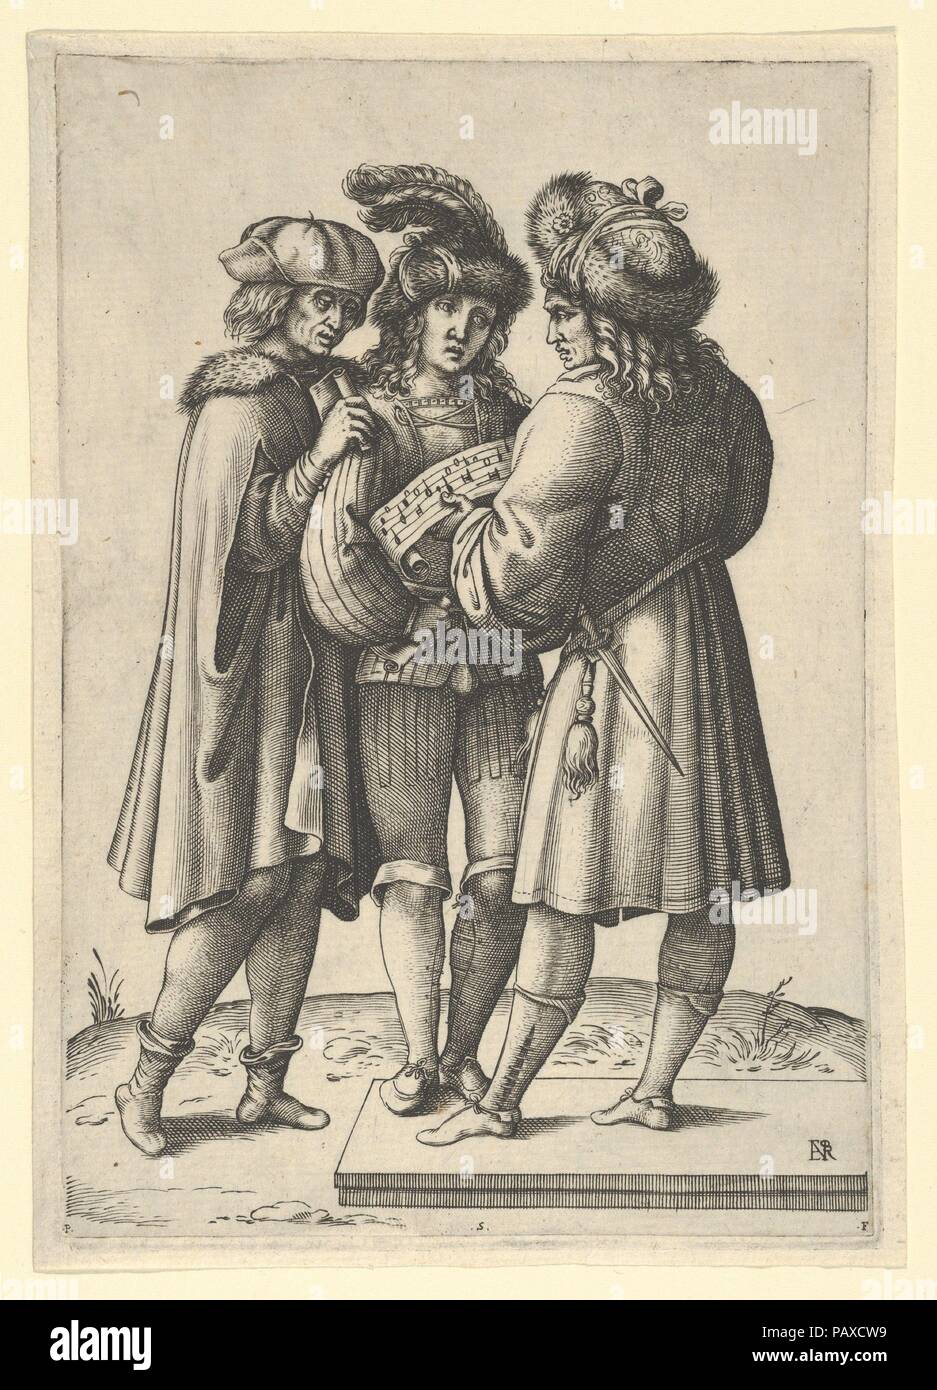 Three male singers standing together holding a sheet of music. Artist: After Marcantonio Raimondi (Italian, Argini (?) ca. 1480-before 1534 Bologna (?)); Attributed to Luca Ciamberlano (Italian, active Rome, 1599-1641). Dimensions: Plate: 6 3/4 × 4 13/16 in. (17.2 × 12.3 cm)  Sheet: 7 3/16 × 5 1/16 in. (18.2 × 12.9 cm). Publisher: Pietro Stefanoni (Italian, Valstagna ca. 1557- ca. 1642 Rome). Date: ca. 1599-1641. Museum: Metropolitan Museum of Art, New York, USA. Stock Photo